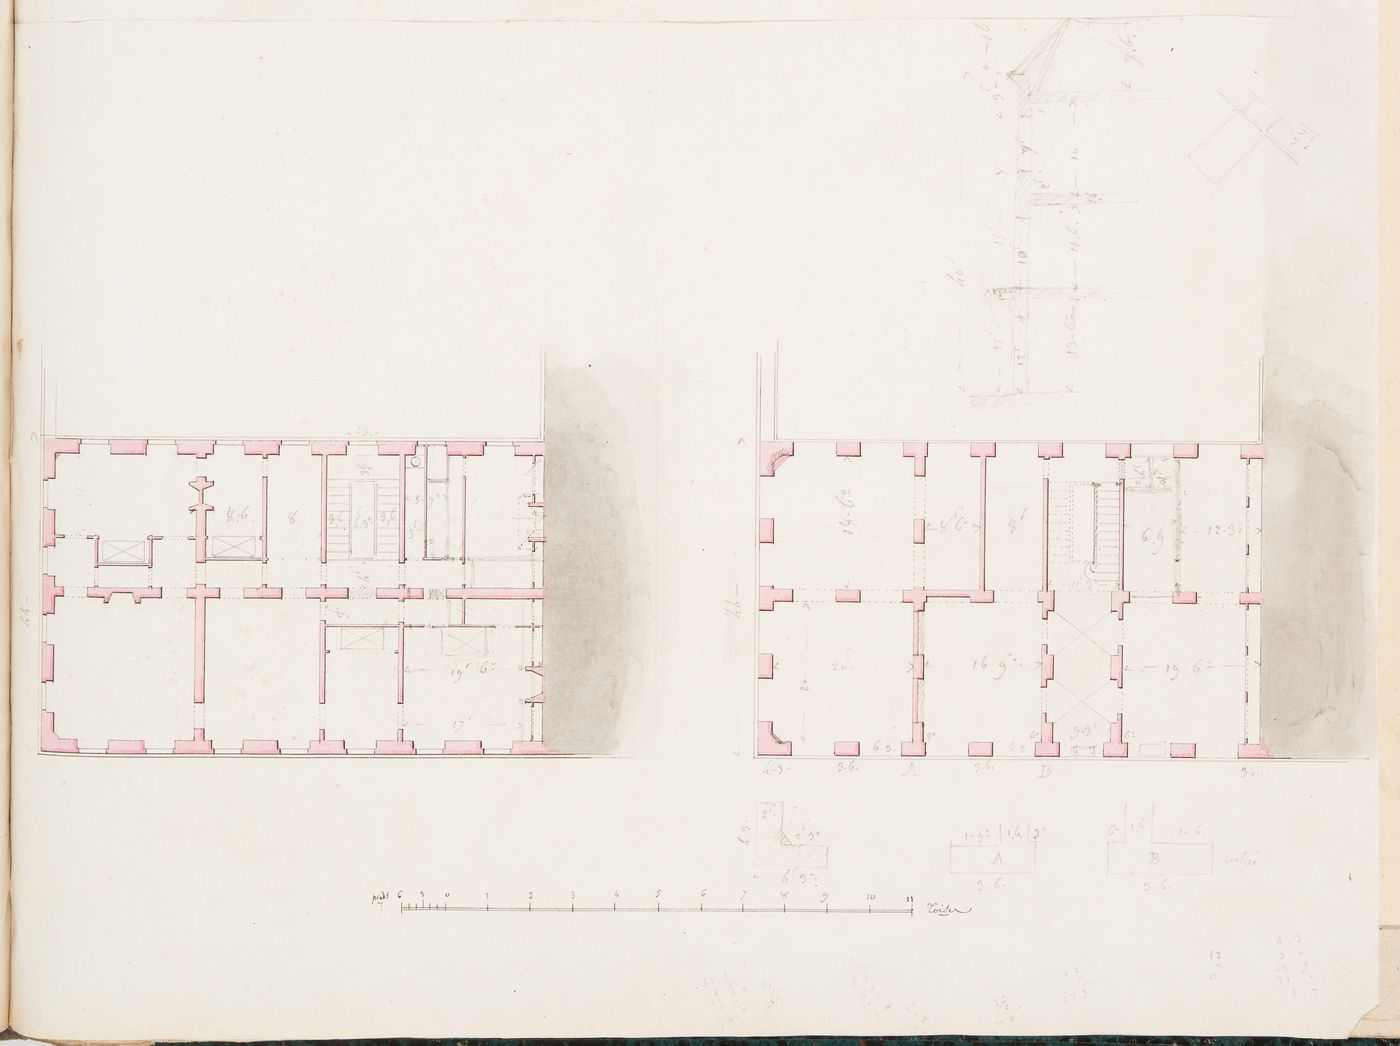 Plans and sketch section, possibly for a hôtel for the de Lorgeril family in Rennes